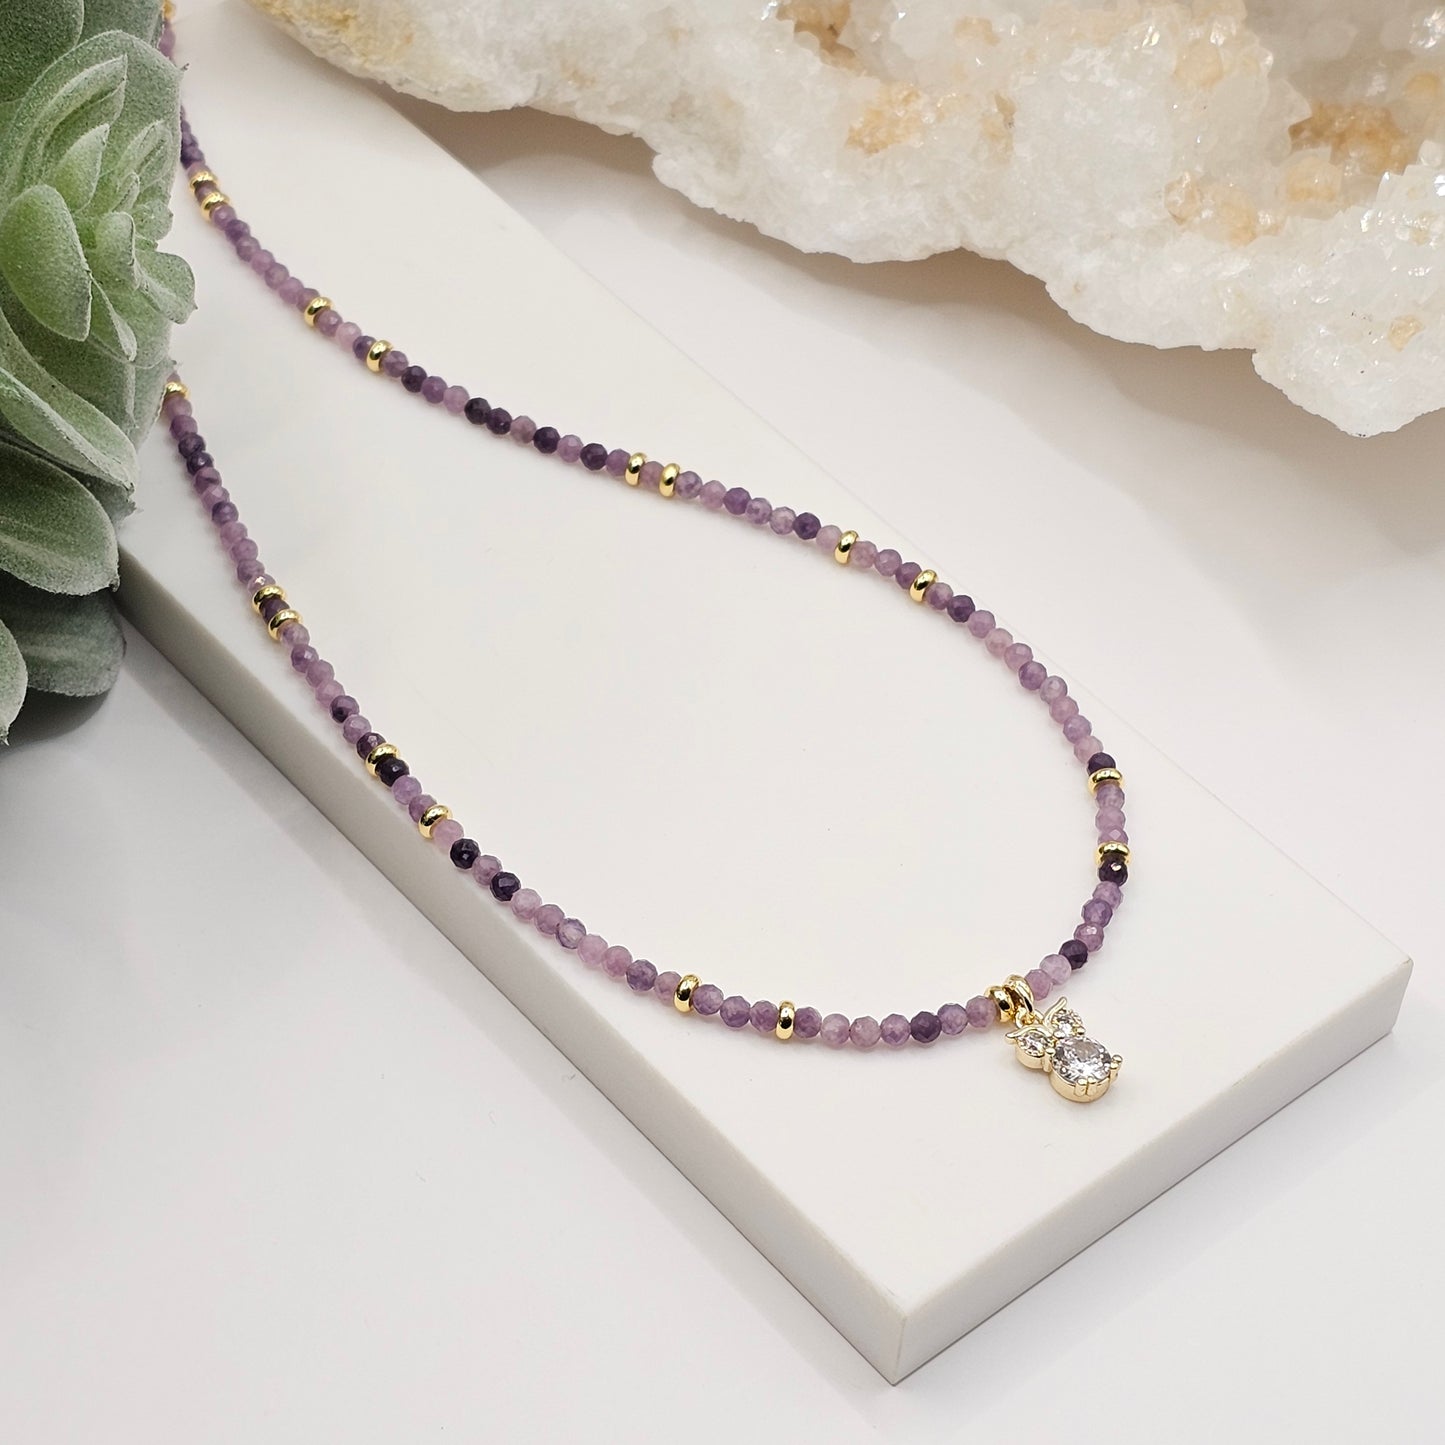 Wisdom Necklace - Lavender Jade | Delicate, faceted Lavender Jade bead necklace with an 18k gold plated Cubic Zirconia owl pendant and stainless steel clasp | Valentine's Day, Handmade Gemstone Jewellery